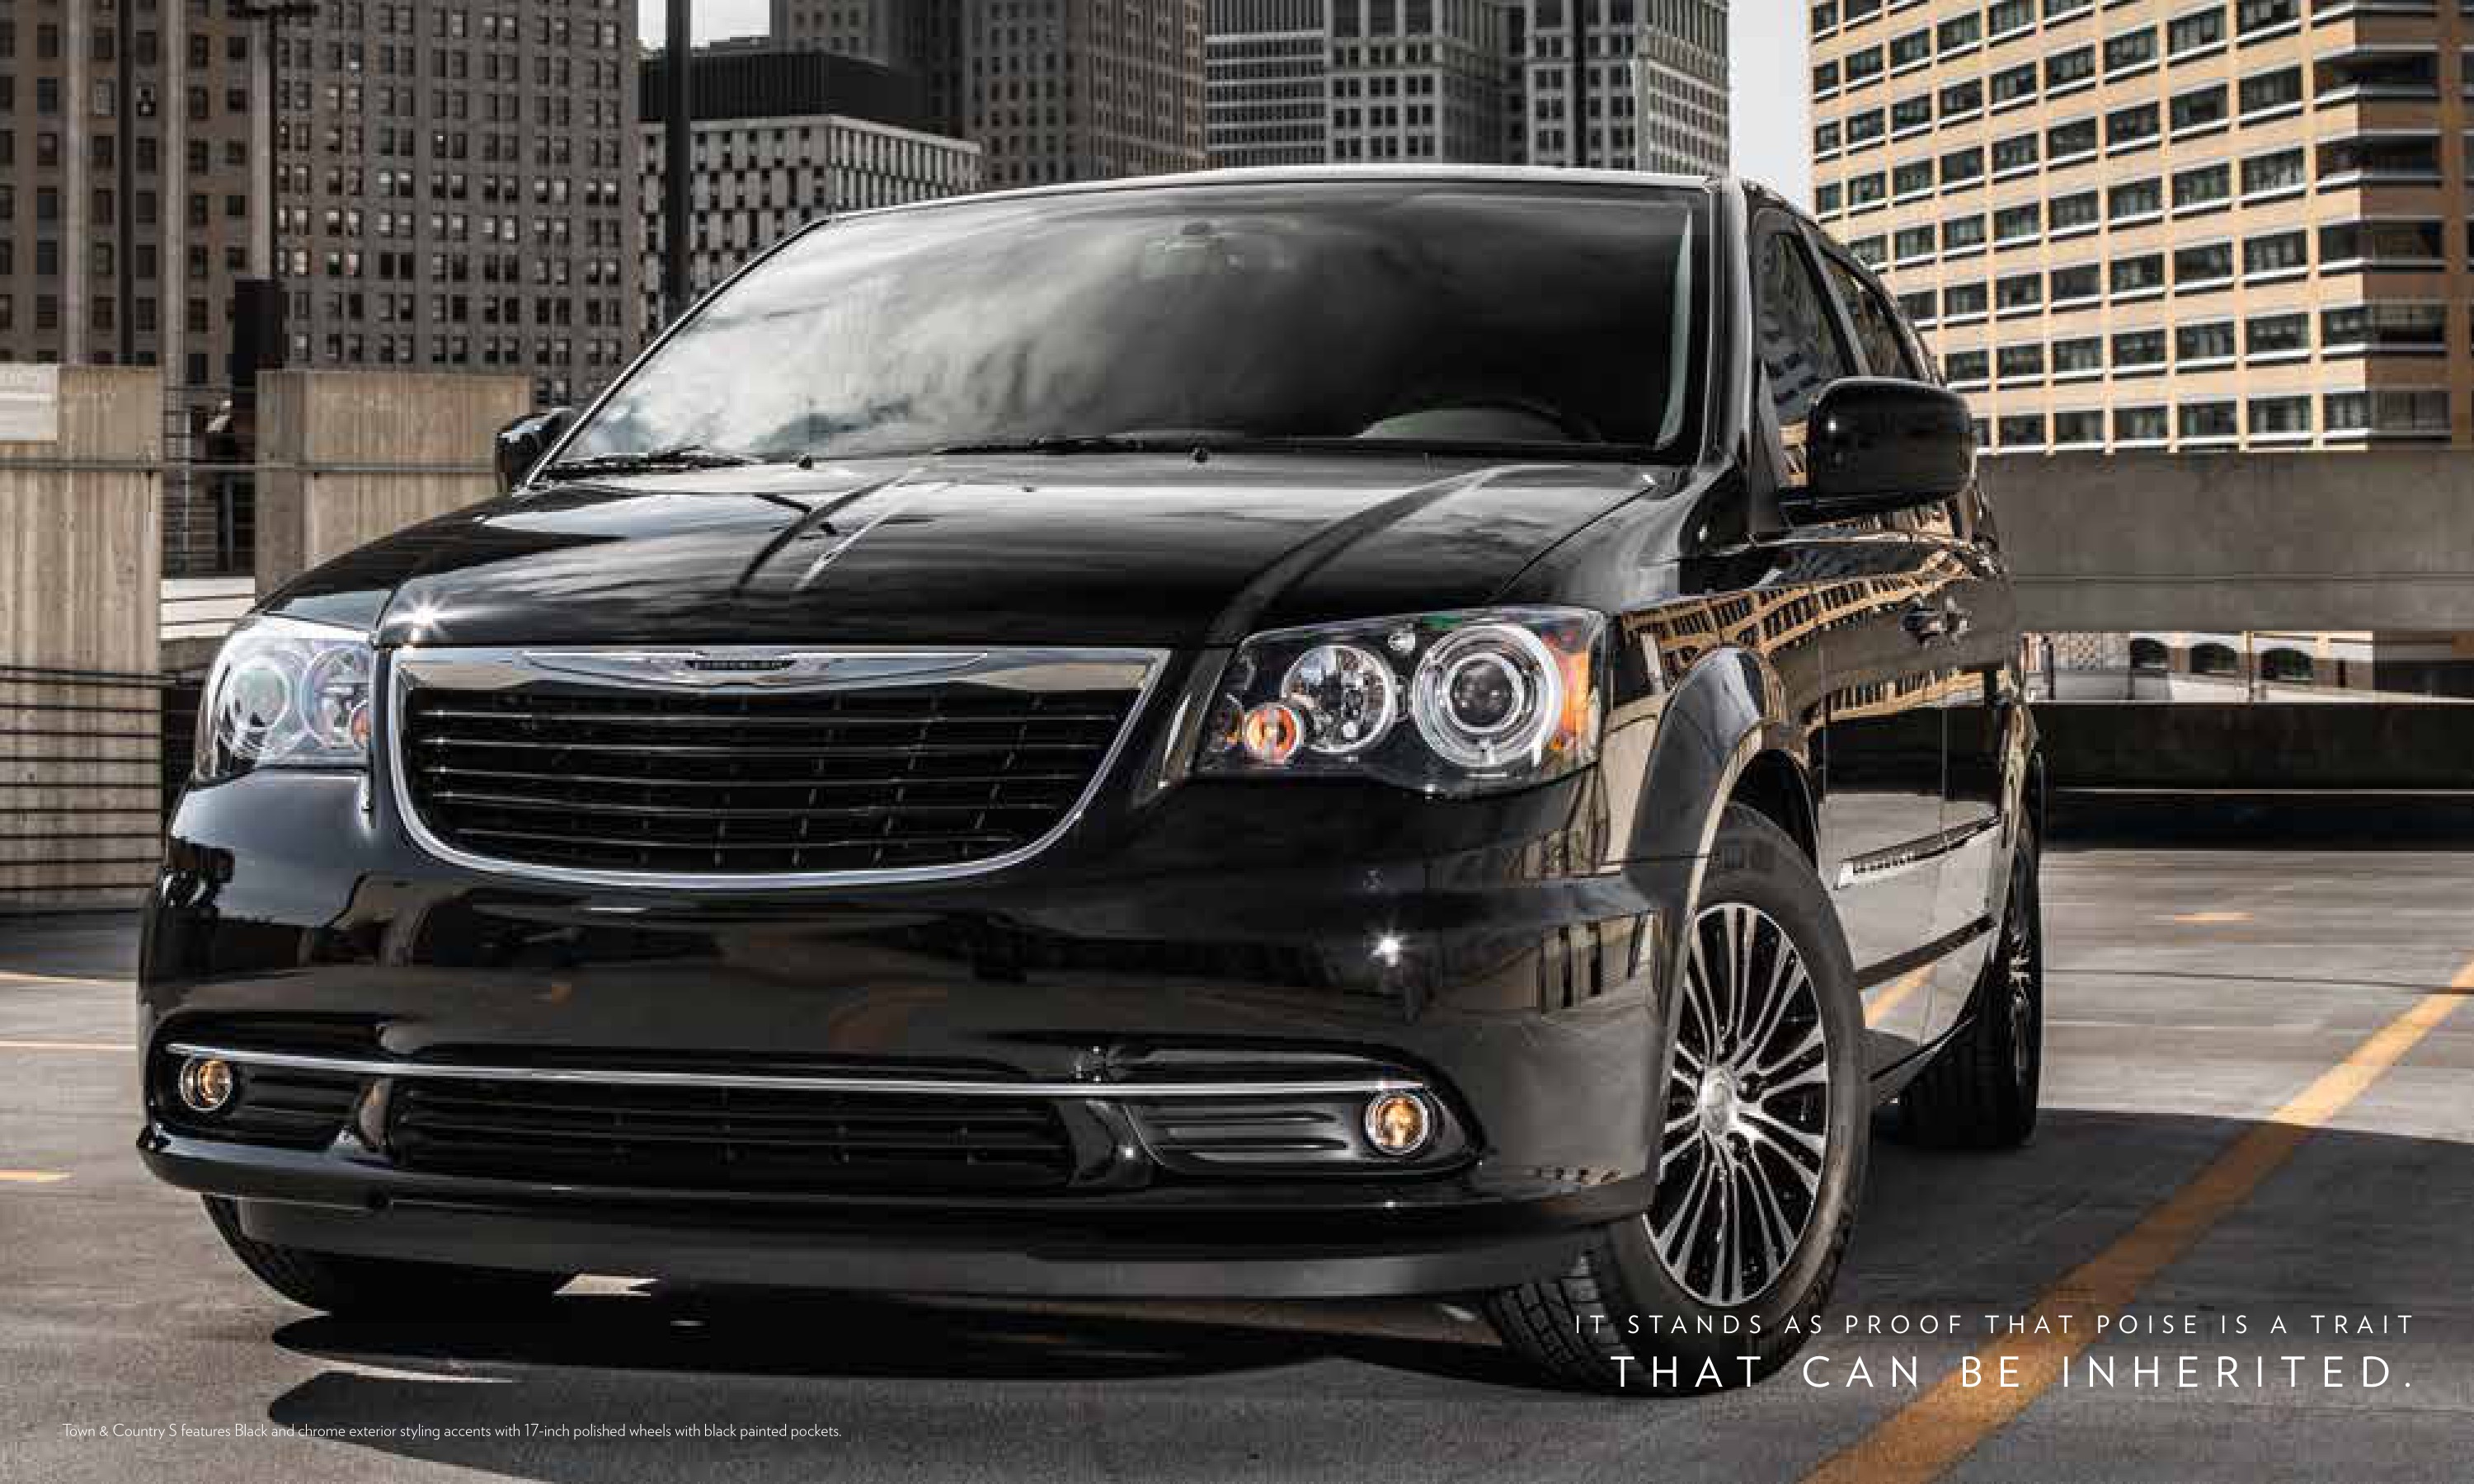 2014 Chrysler Town & Country Brochure Page 12